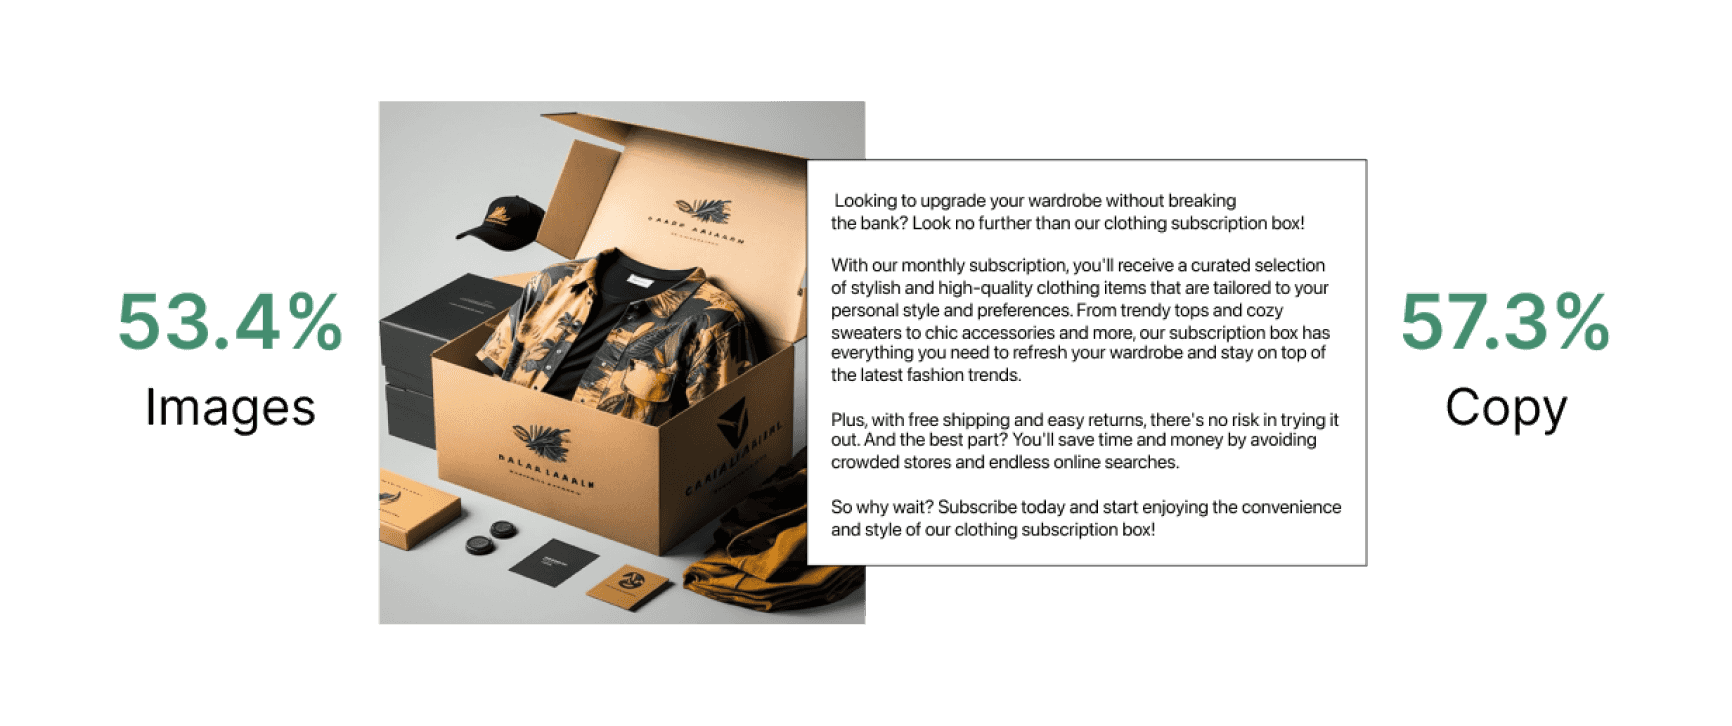 Image of a subscription box filled with clothing and a text description of the subscription service